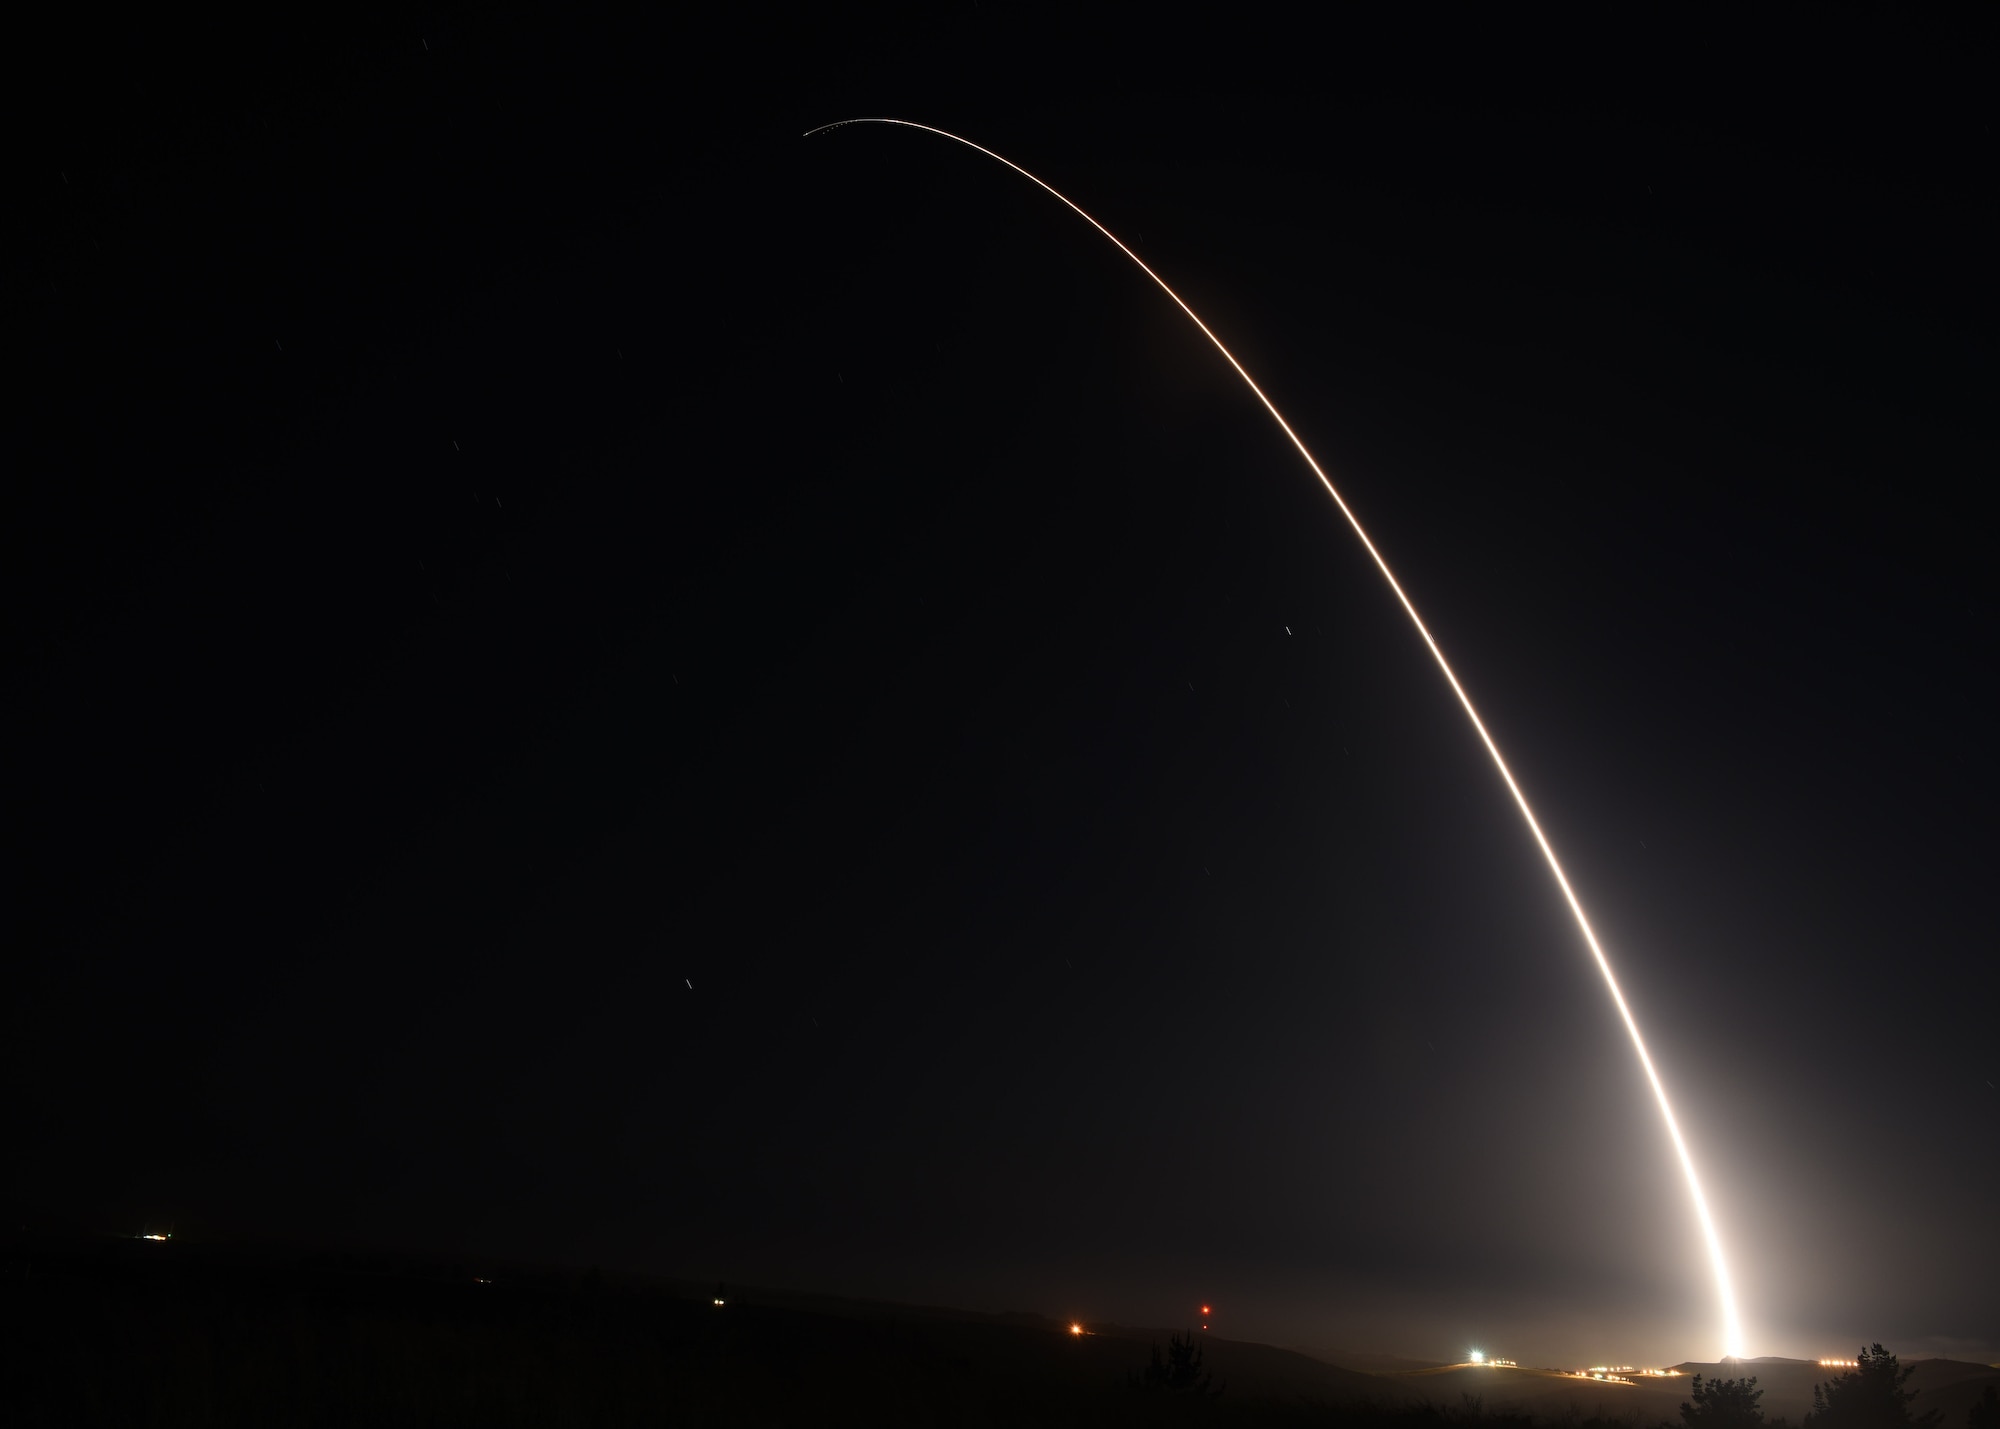 An unarmed Minuteman III intercontinental ballistic missile launches during an operational test at 12:03 a.m., PDT, April 26, from Vandenberg Air Force Base, Calif. (U.S. Air Force photo by Senior Airman Kyla Gifford)